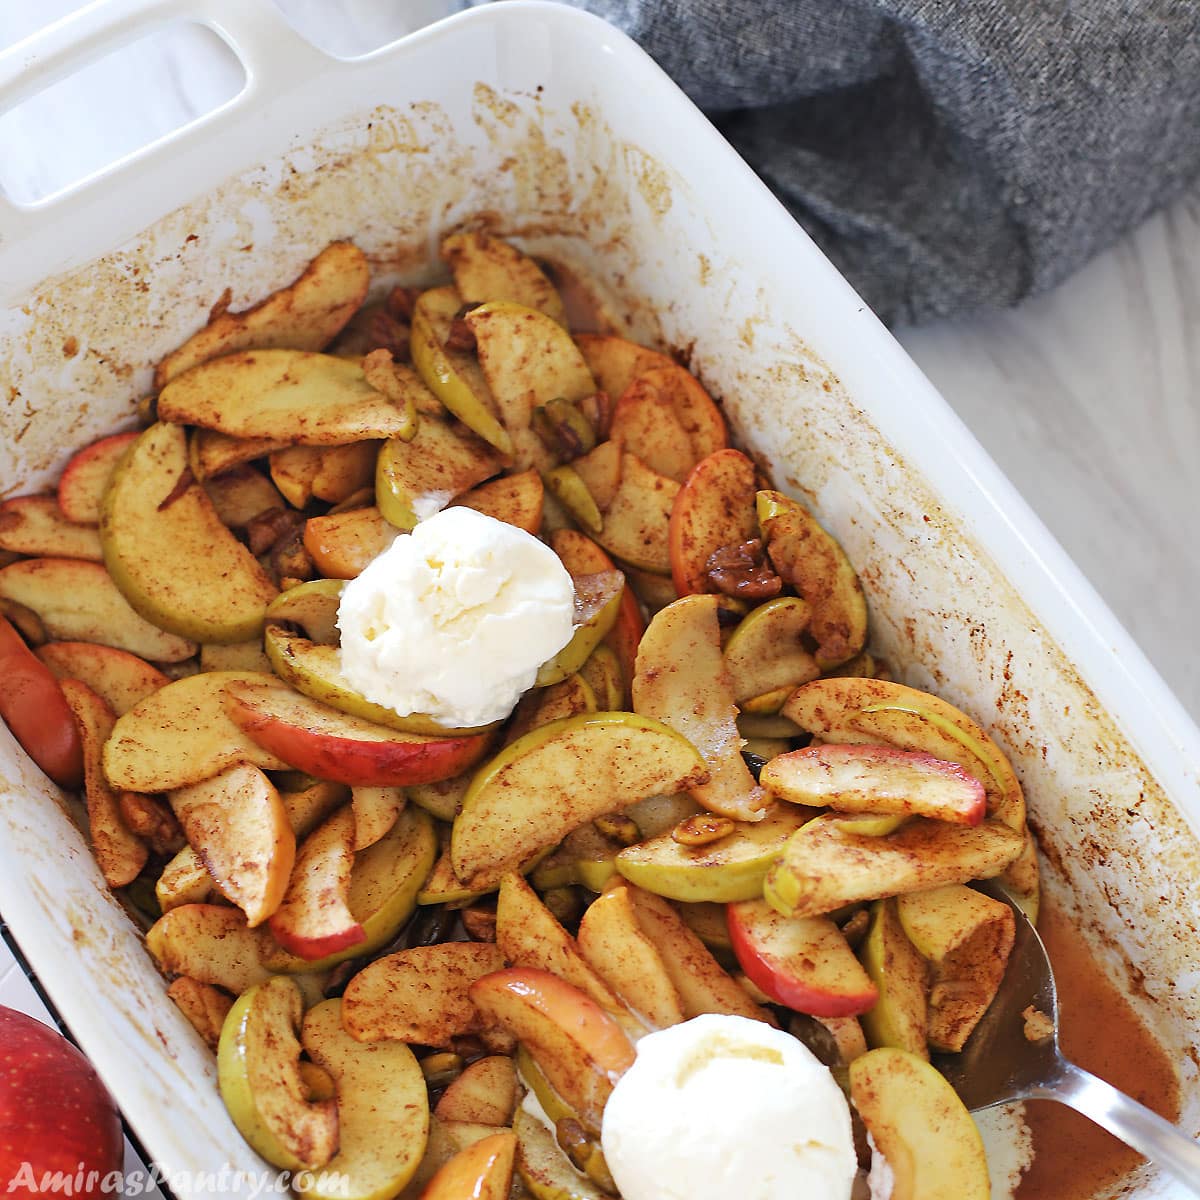 A white oven dish with healthy cinnamon baked apple slices and topped with vanilla ice cream.